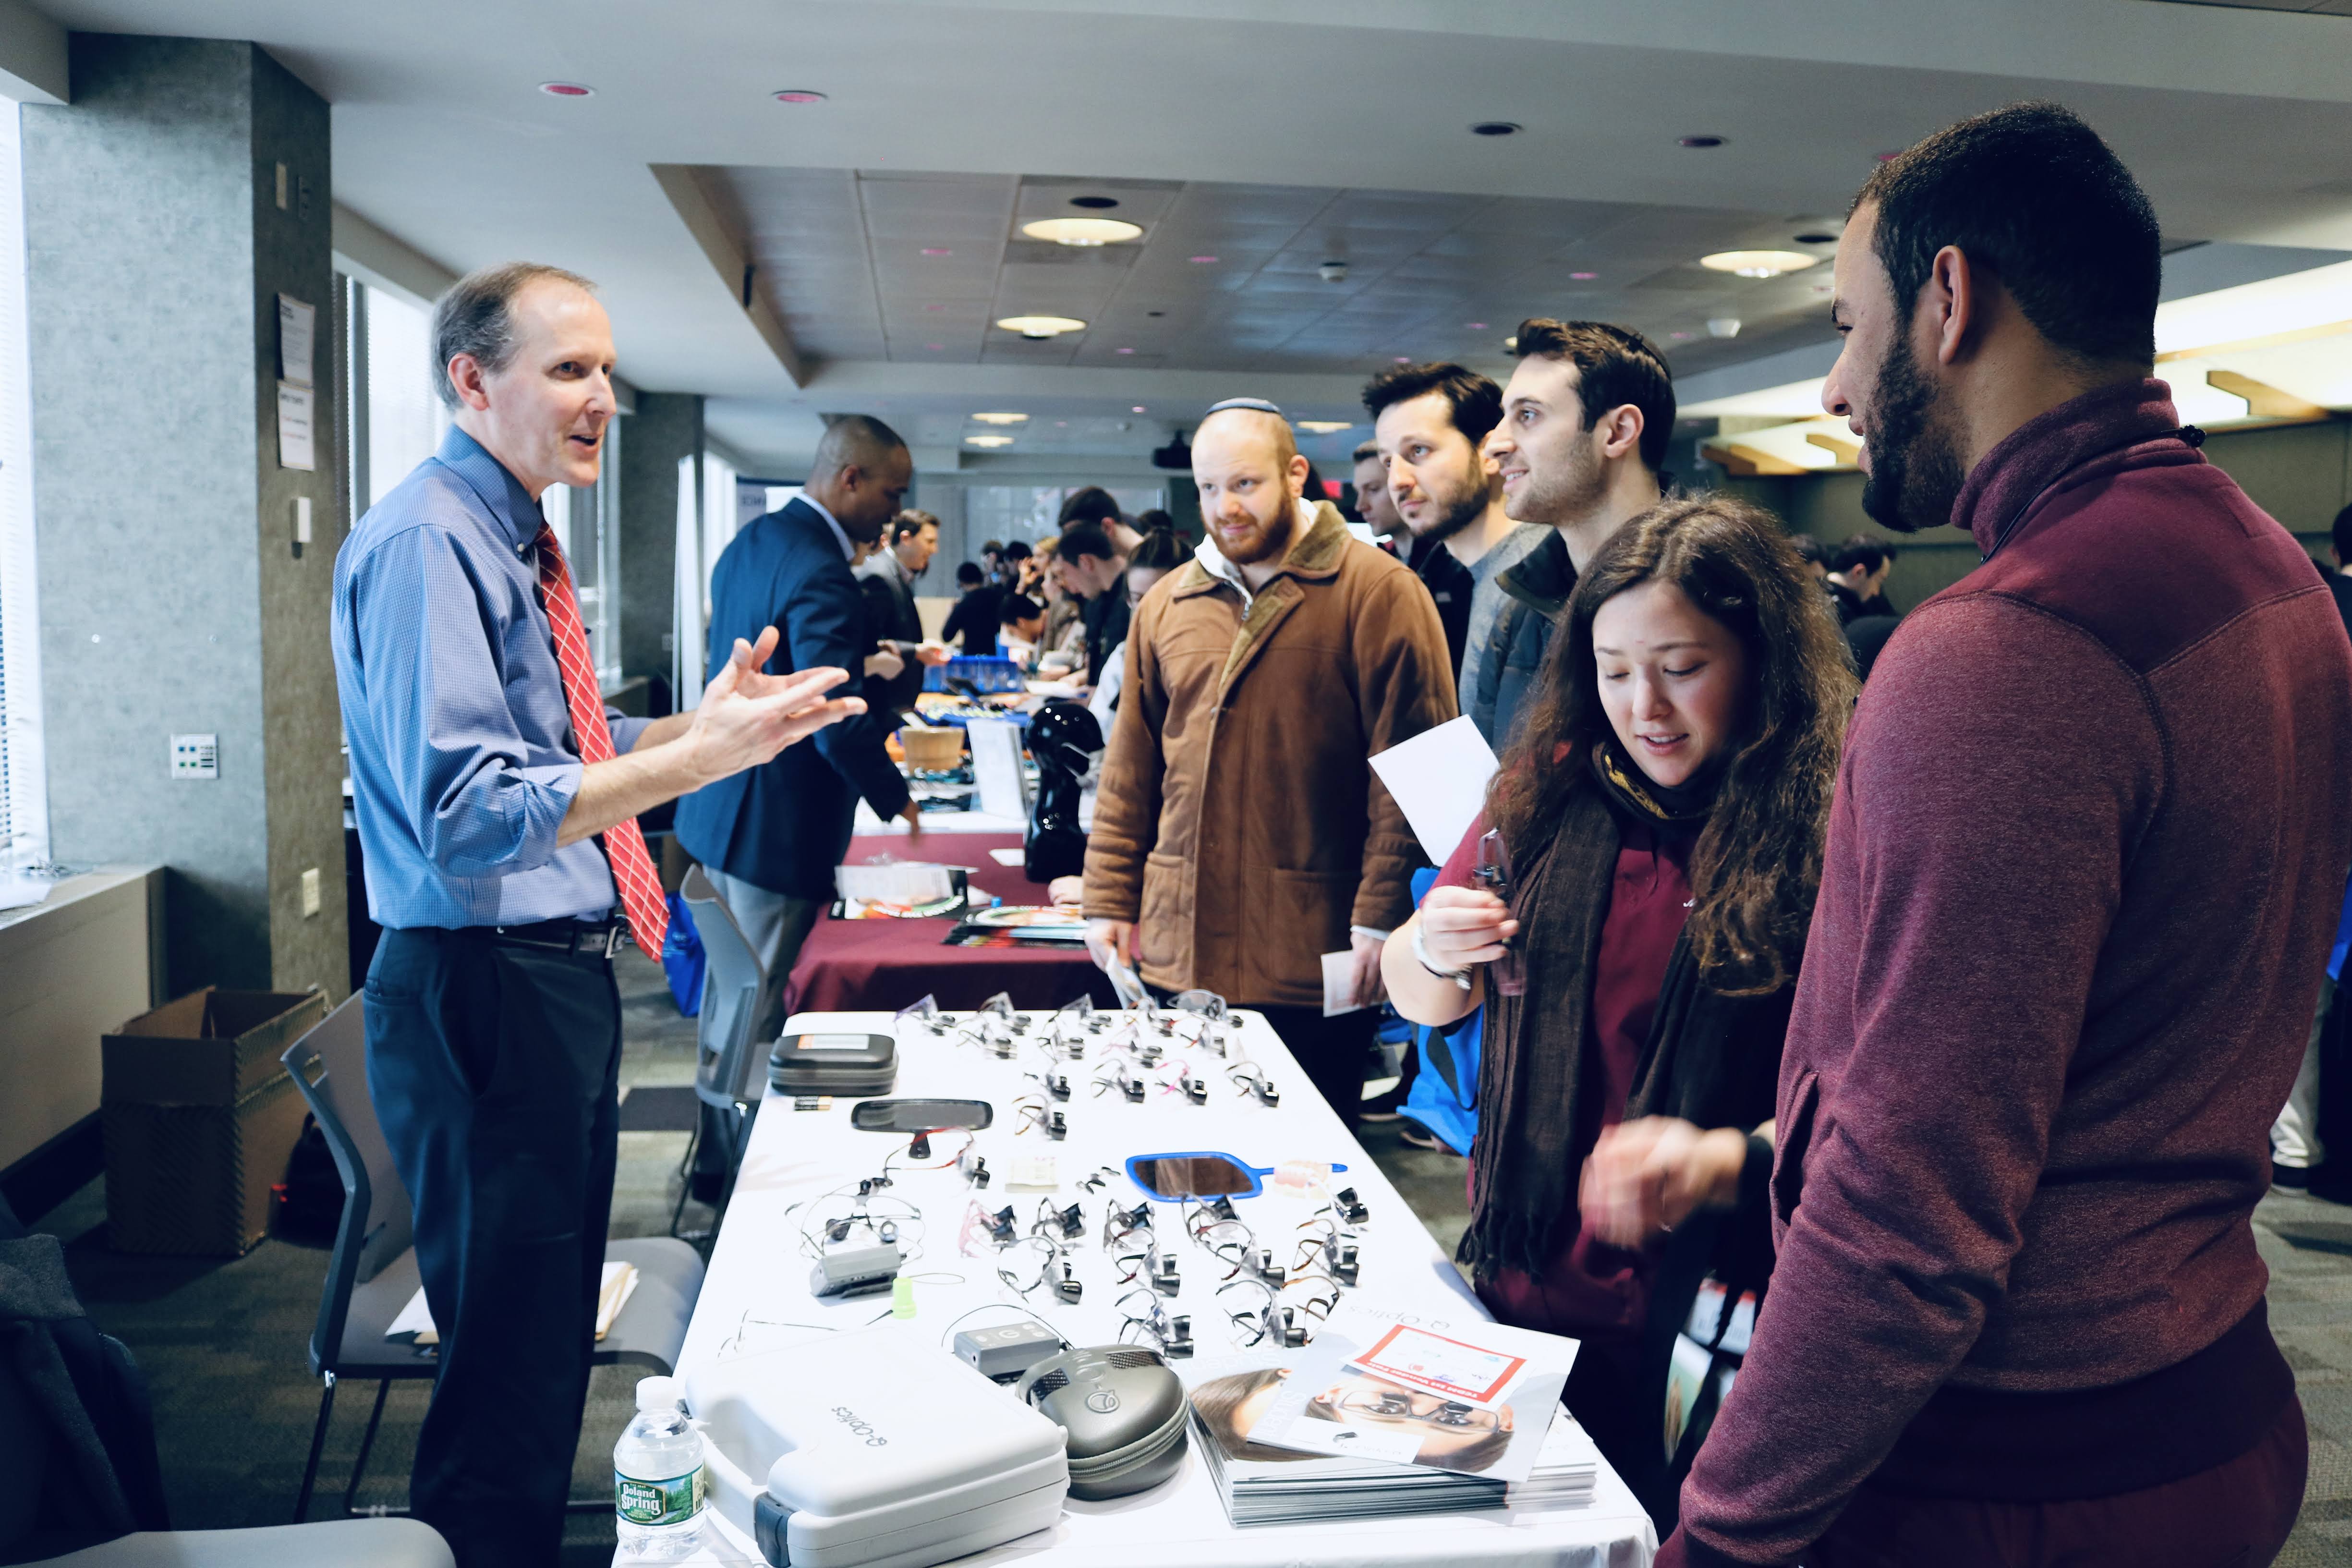 TCDM students extend their industry knowledge at the school's first Vendor Fair